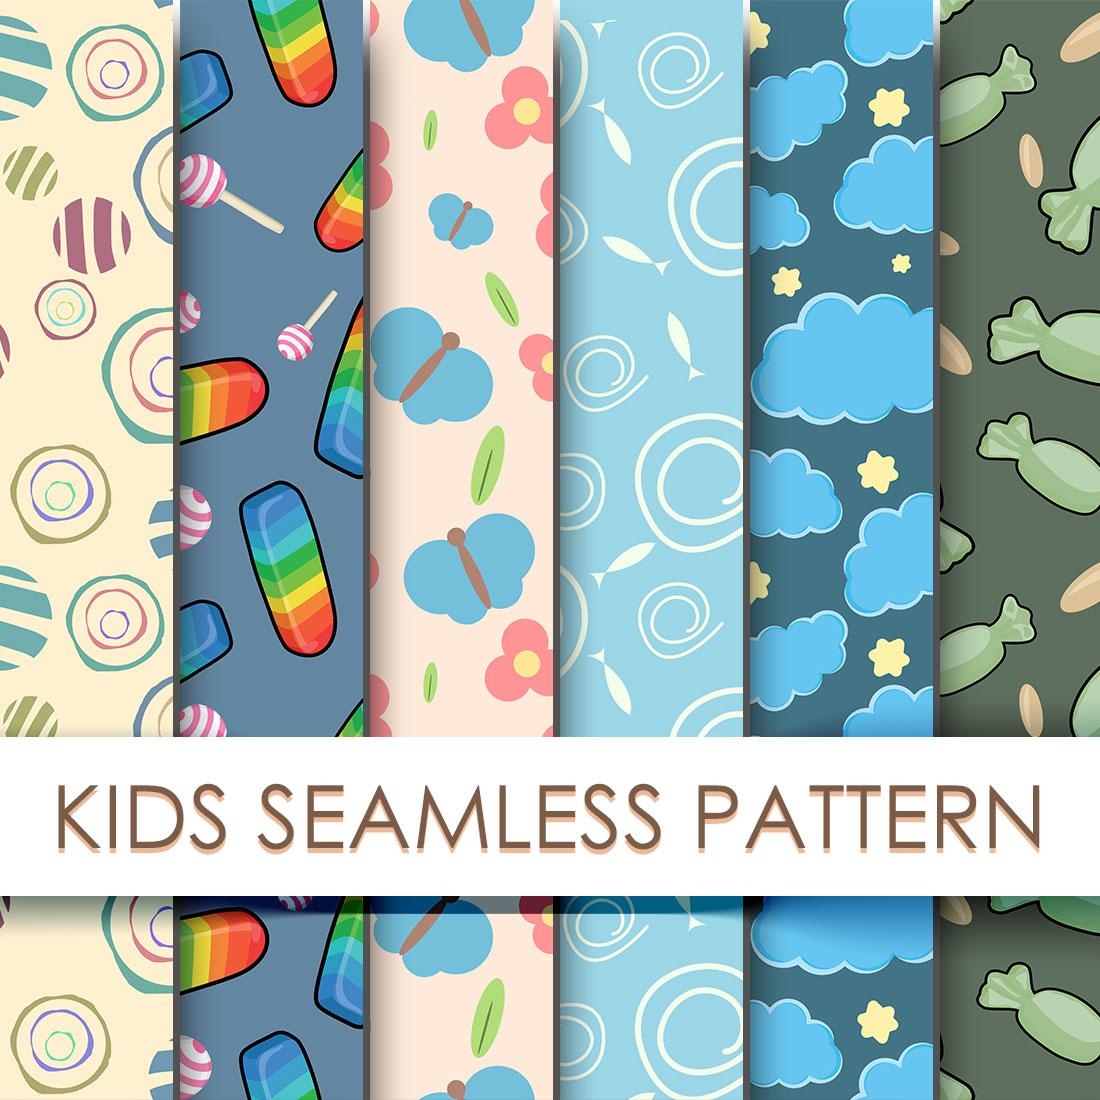 Seamless pattern Textures For Gift Wrapping & Kids Room Decor cover image.